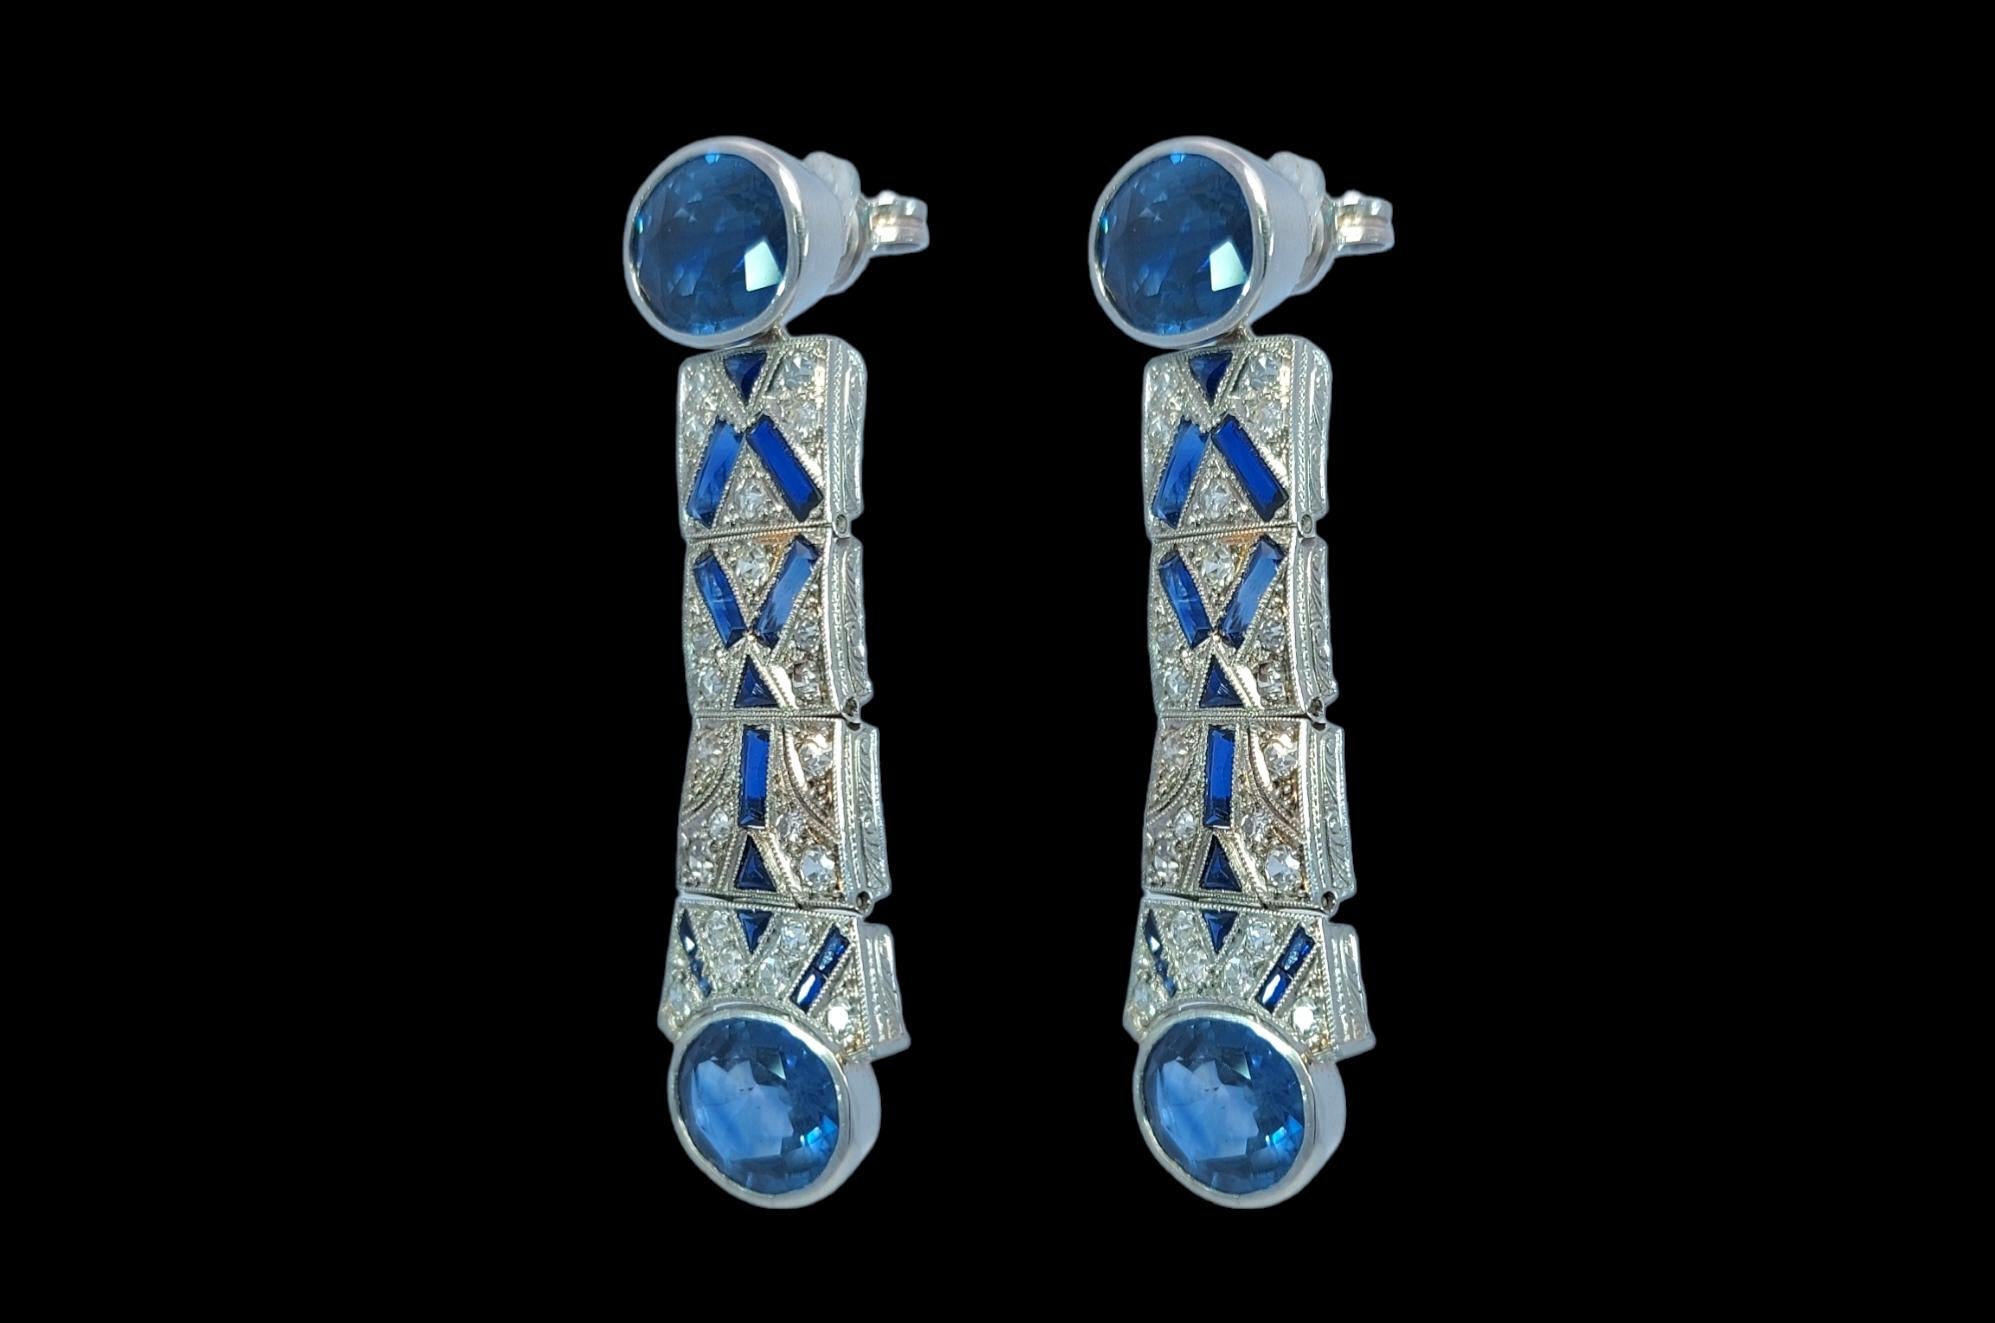 Oval Cut Platinum Earrings with 12 Ct. Sapphires & 1.3 Ct Diamonds For Sale